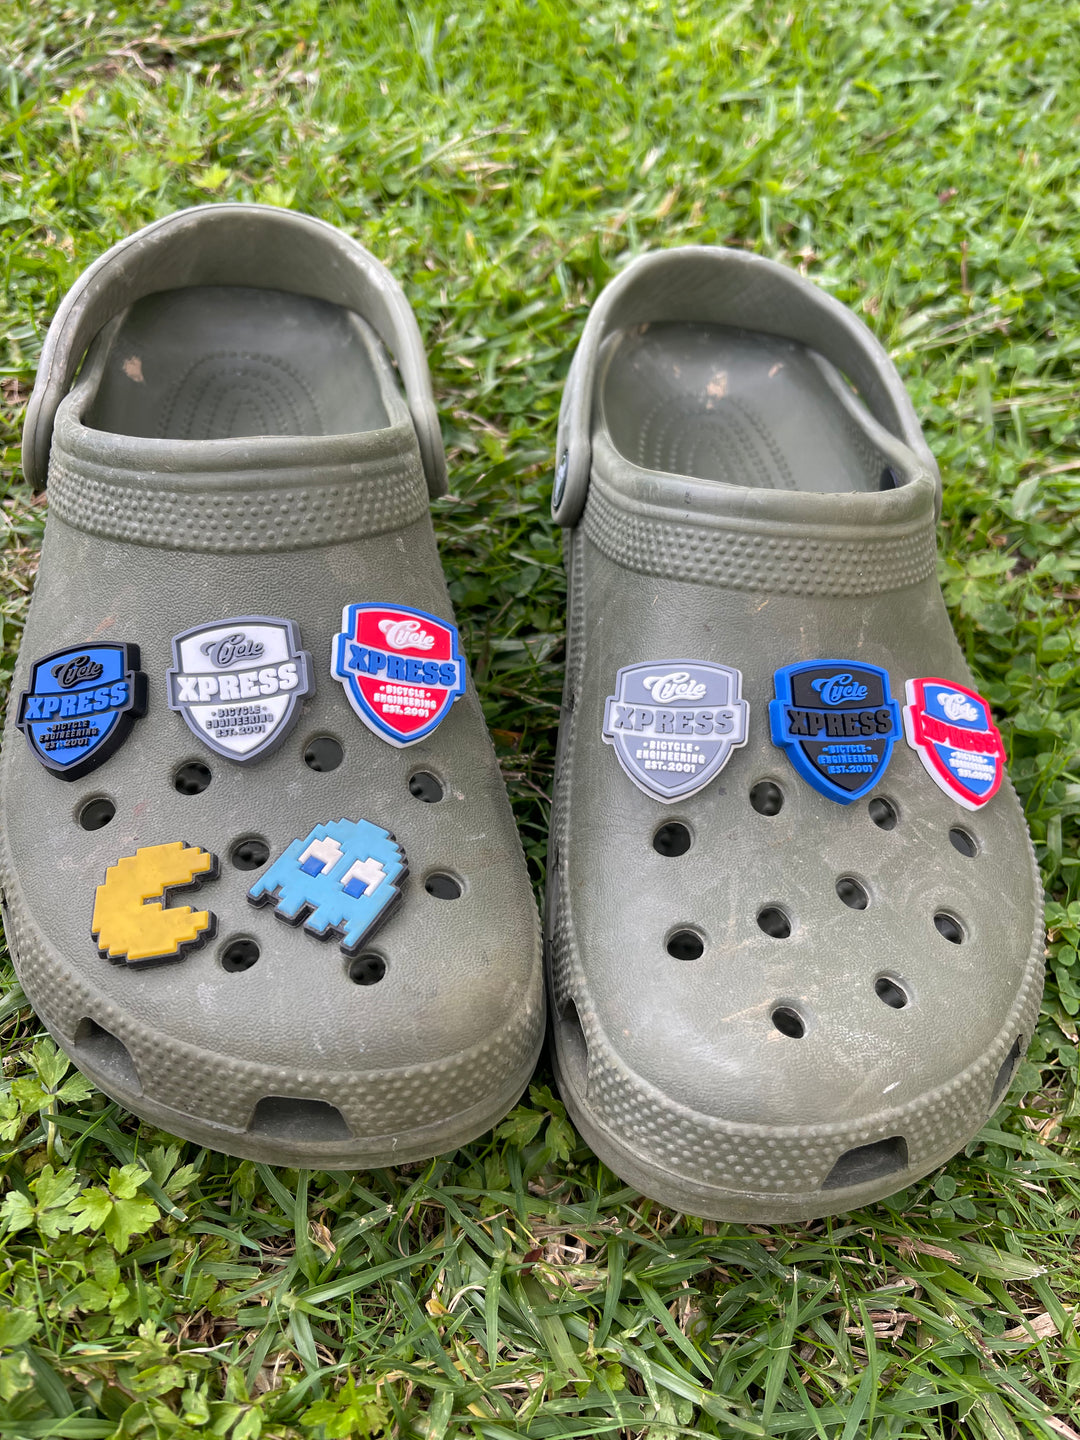 JIBBITZ  shoe charms to make your crocs even cooler